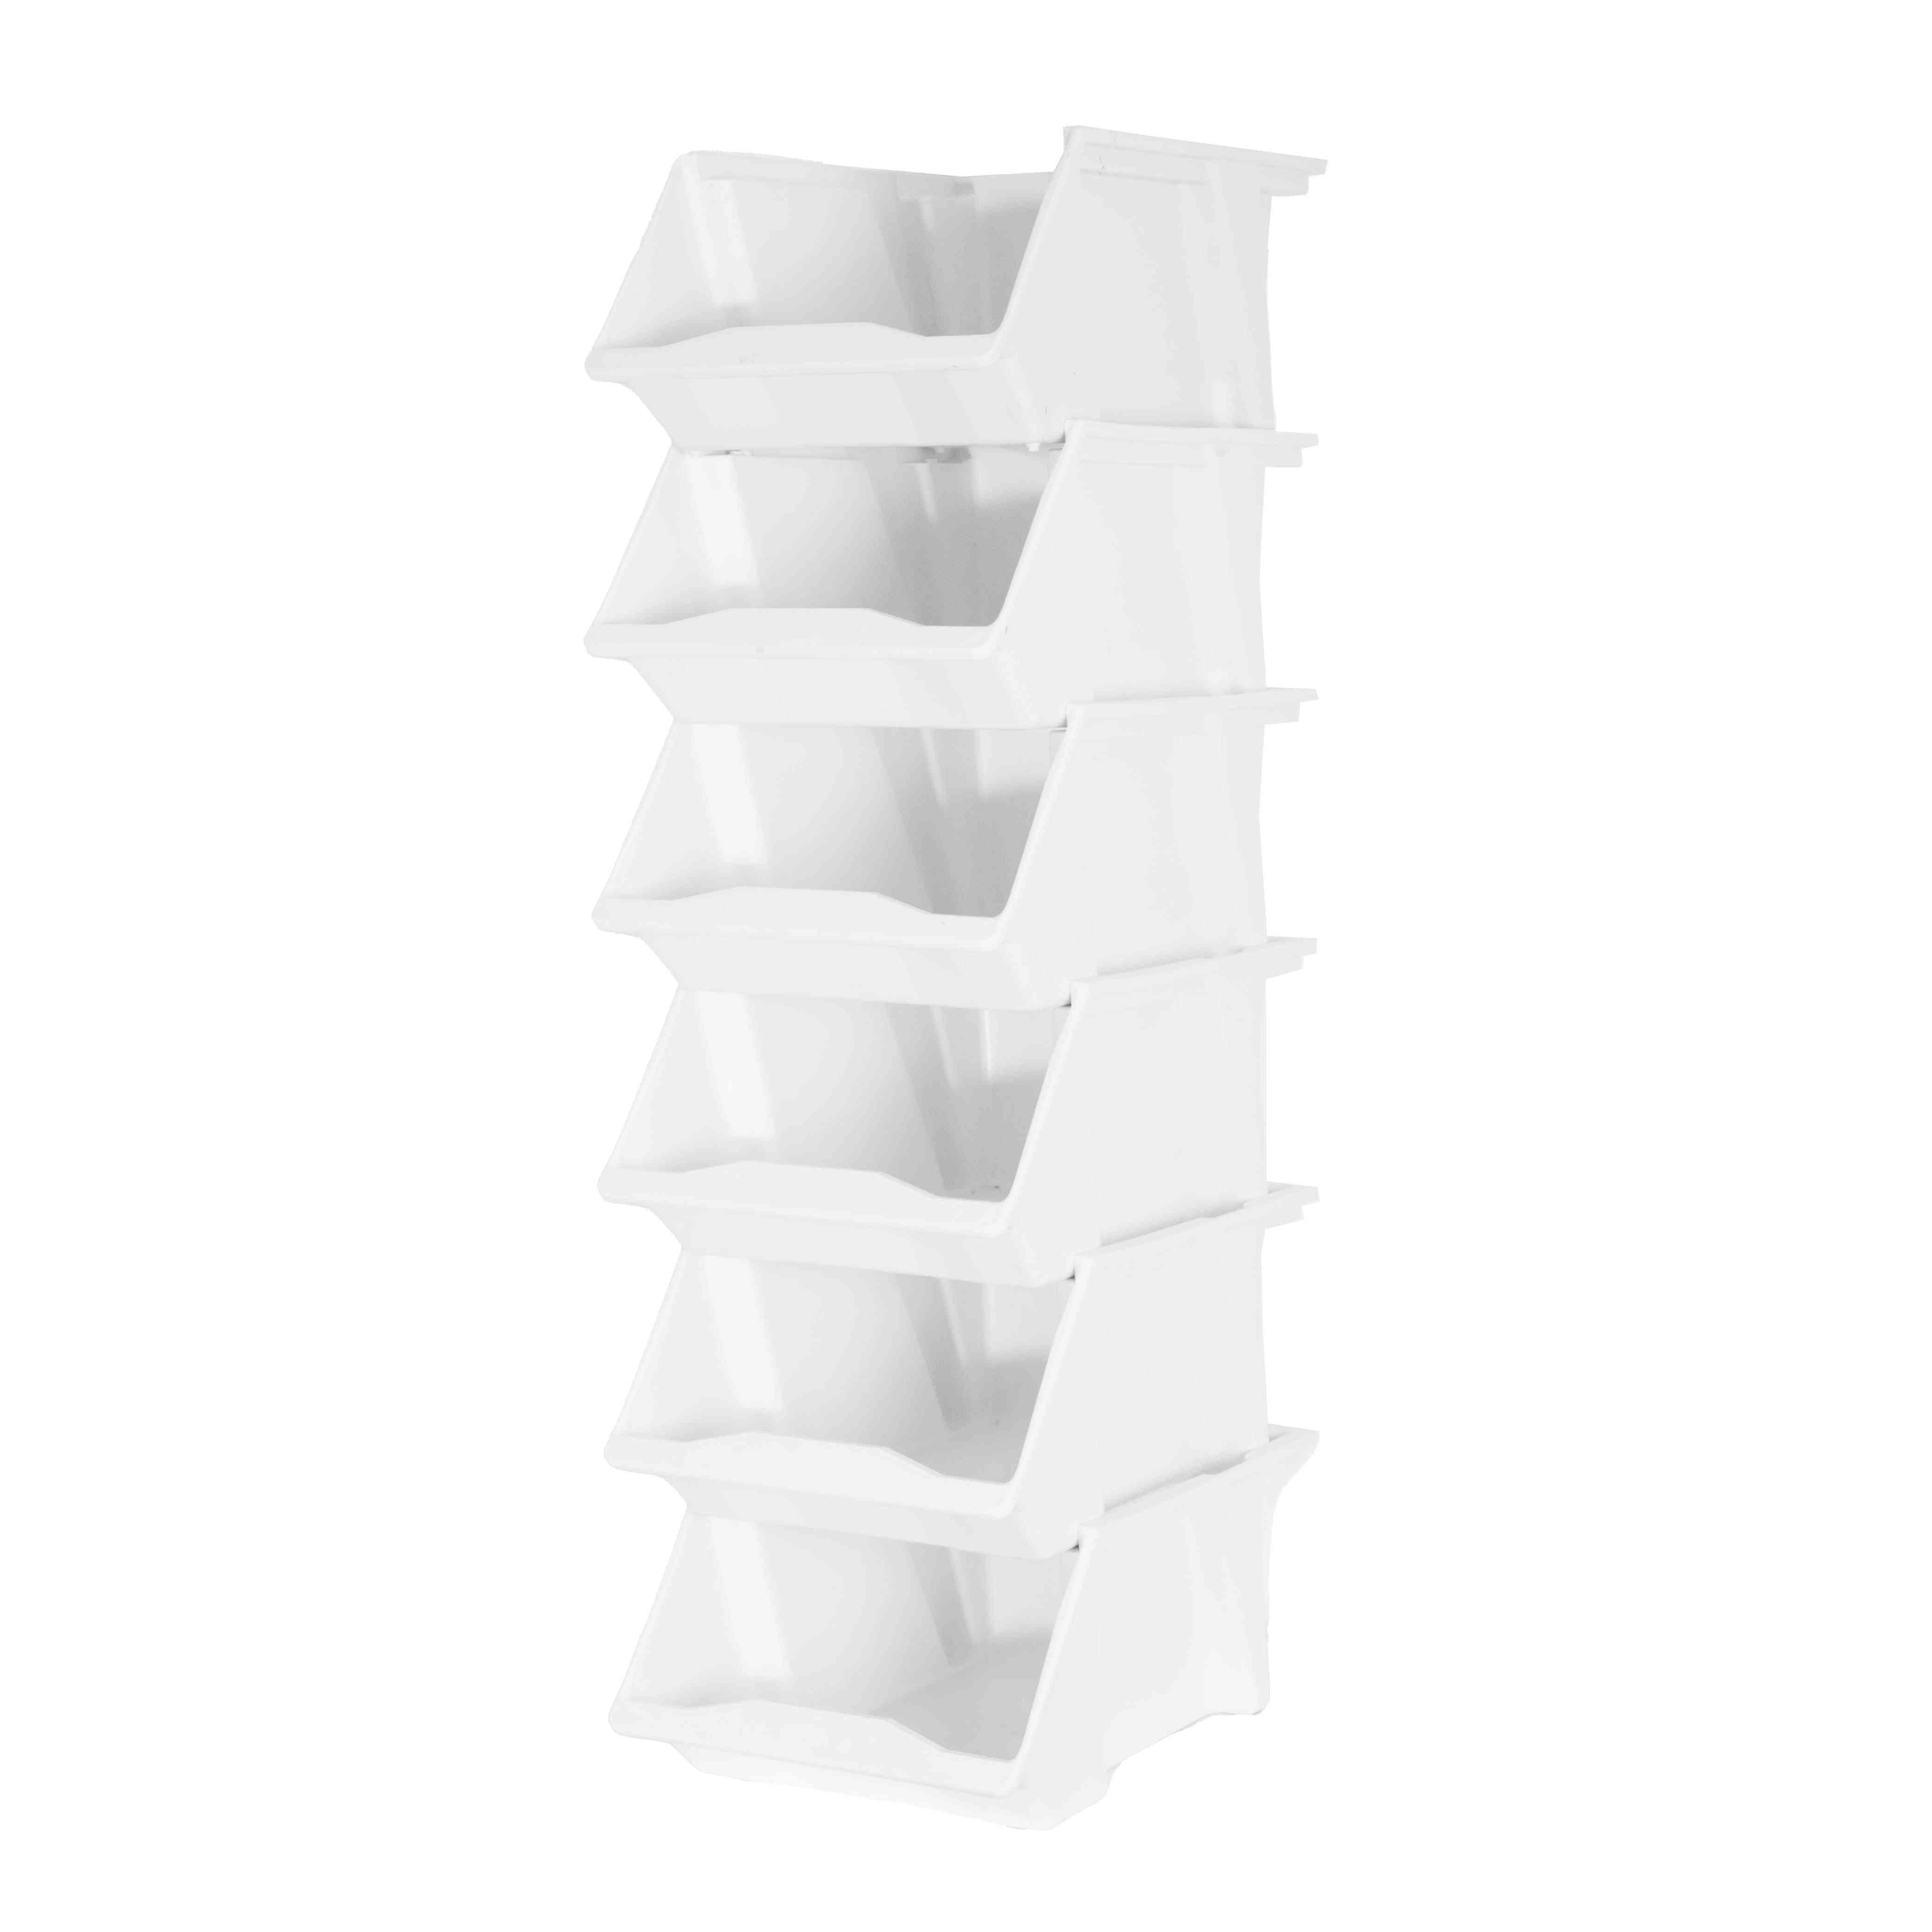 5 Boer Shelf Pack Bins stacked on top of each other to improve storage and space saving